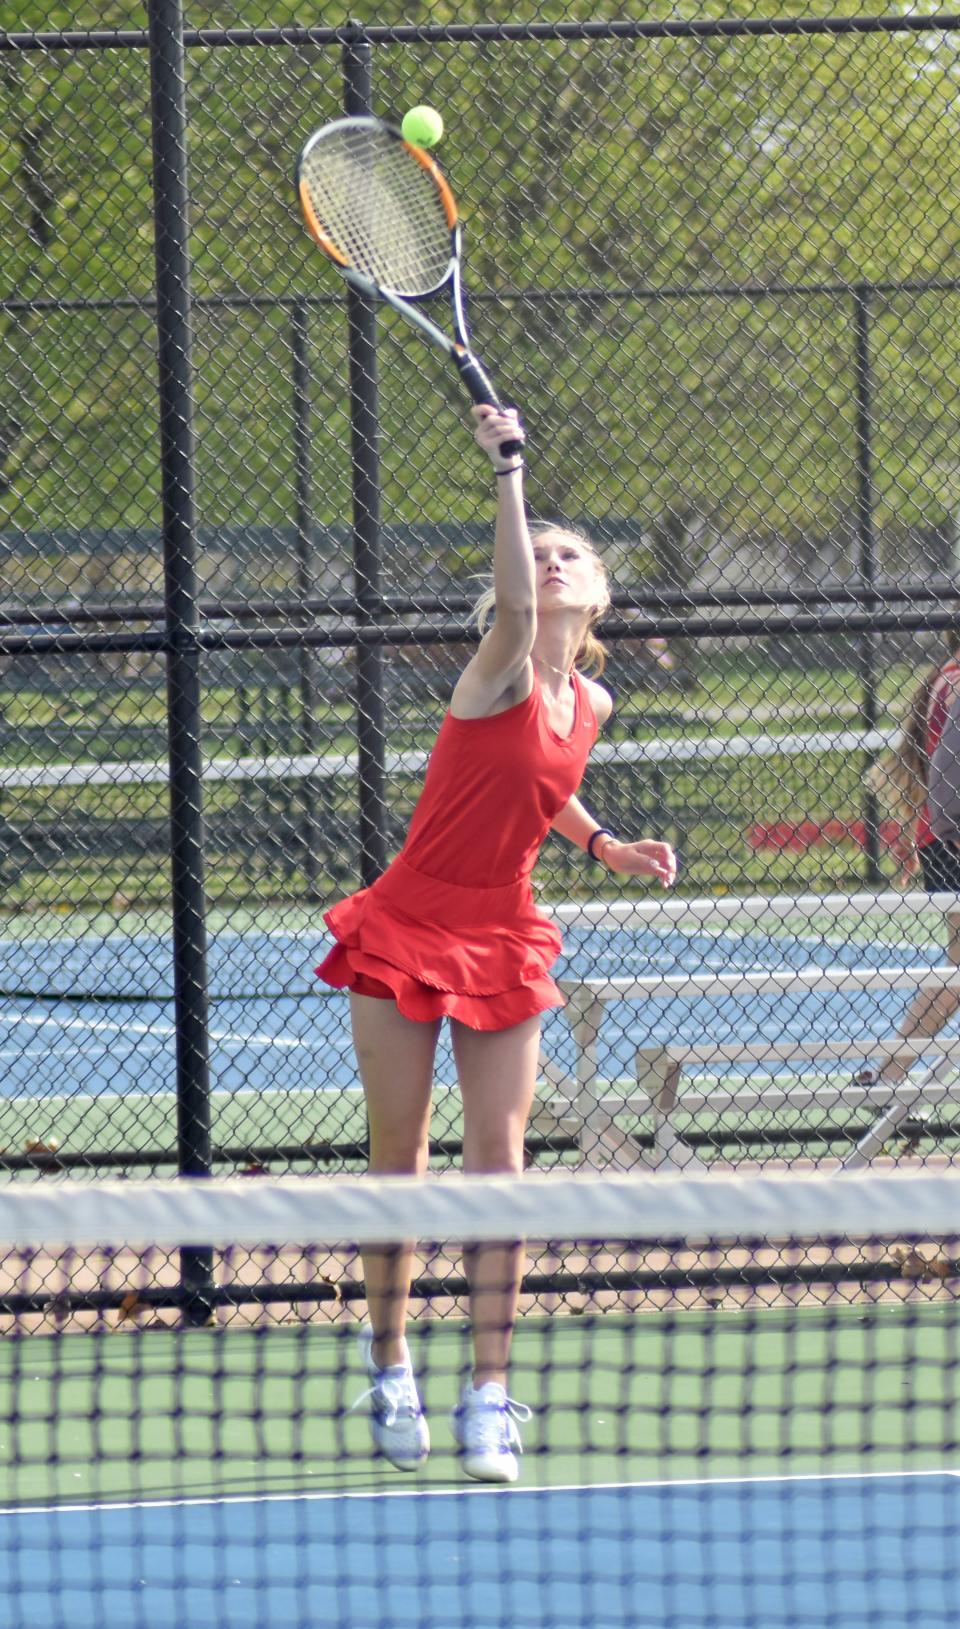 Coldwater's no. 4 singles player Maddie Grife blasts a serve versus Marshall on Monday